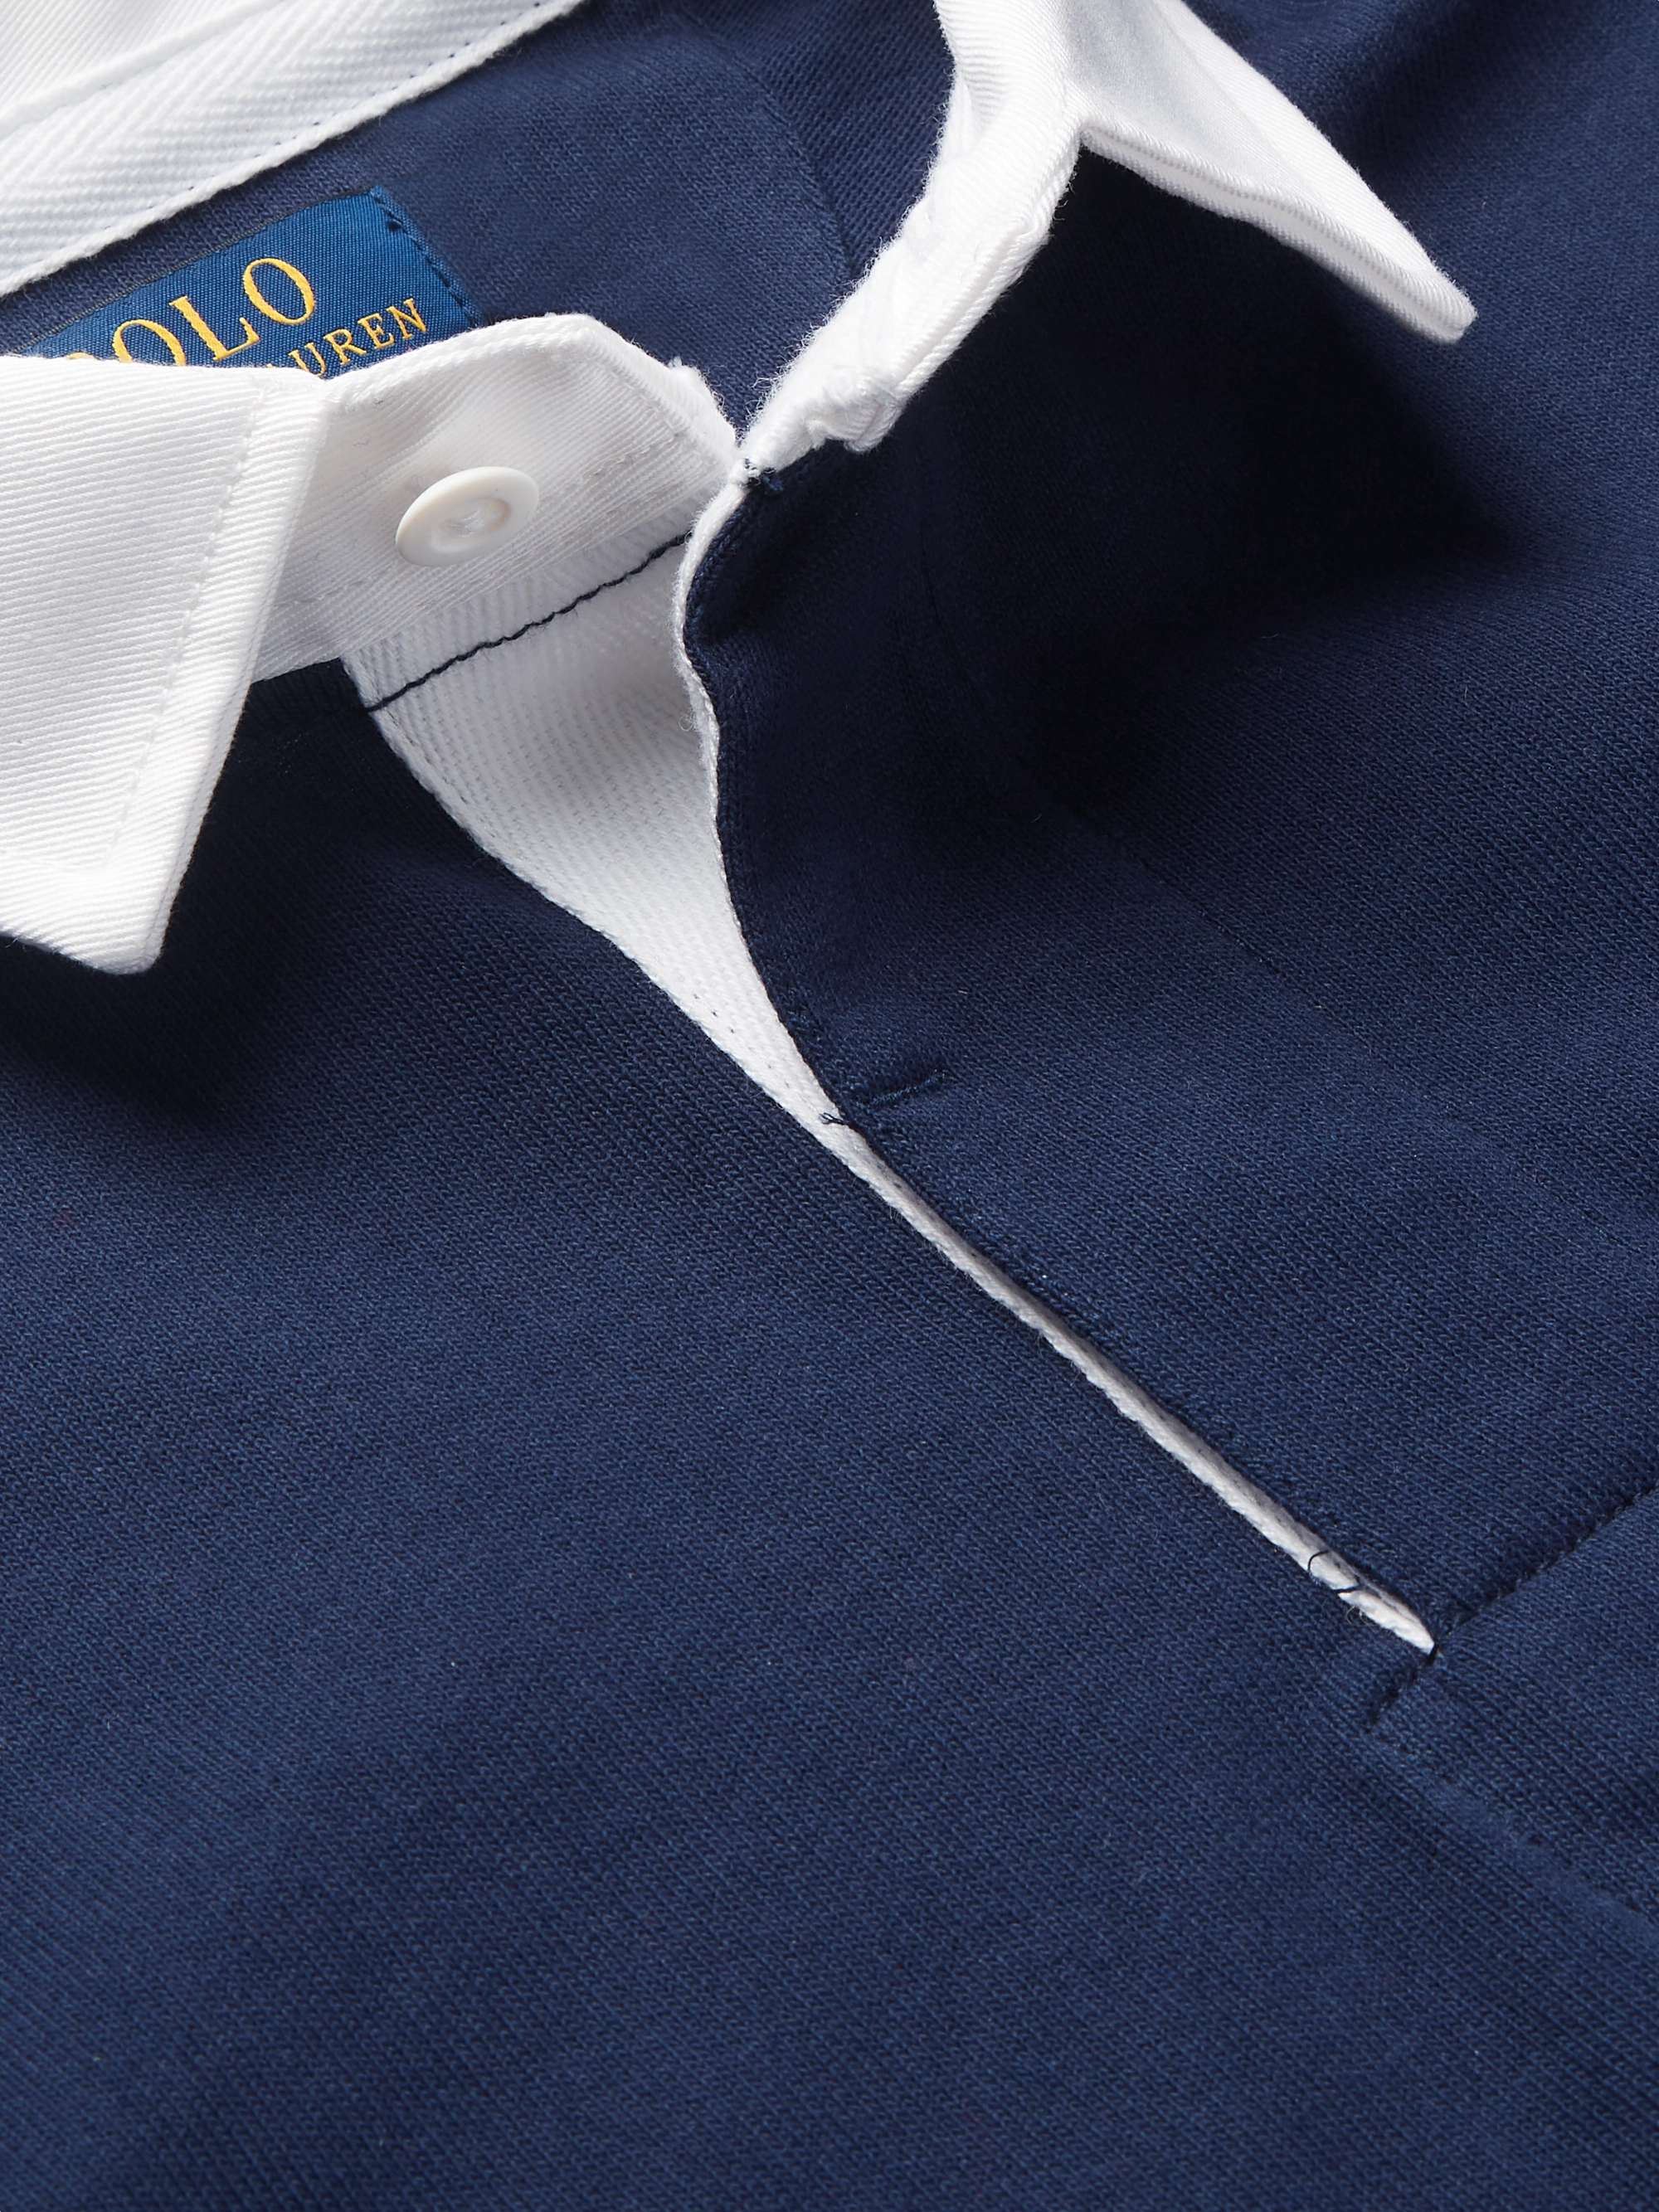 POLO RALPH LAUREN Slim-Fit Logo-Embroidered Cotton-Jersey Polo Shirt